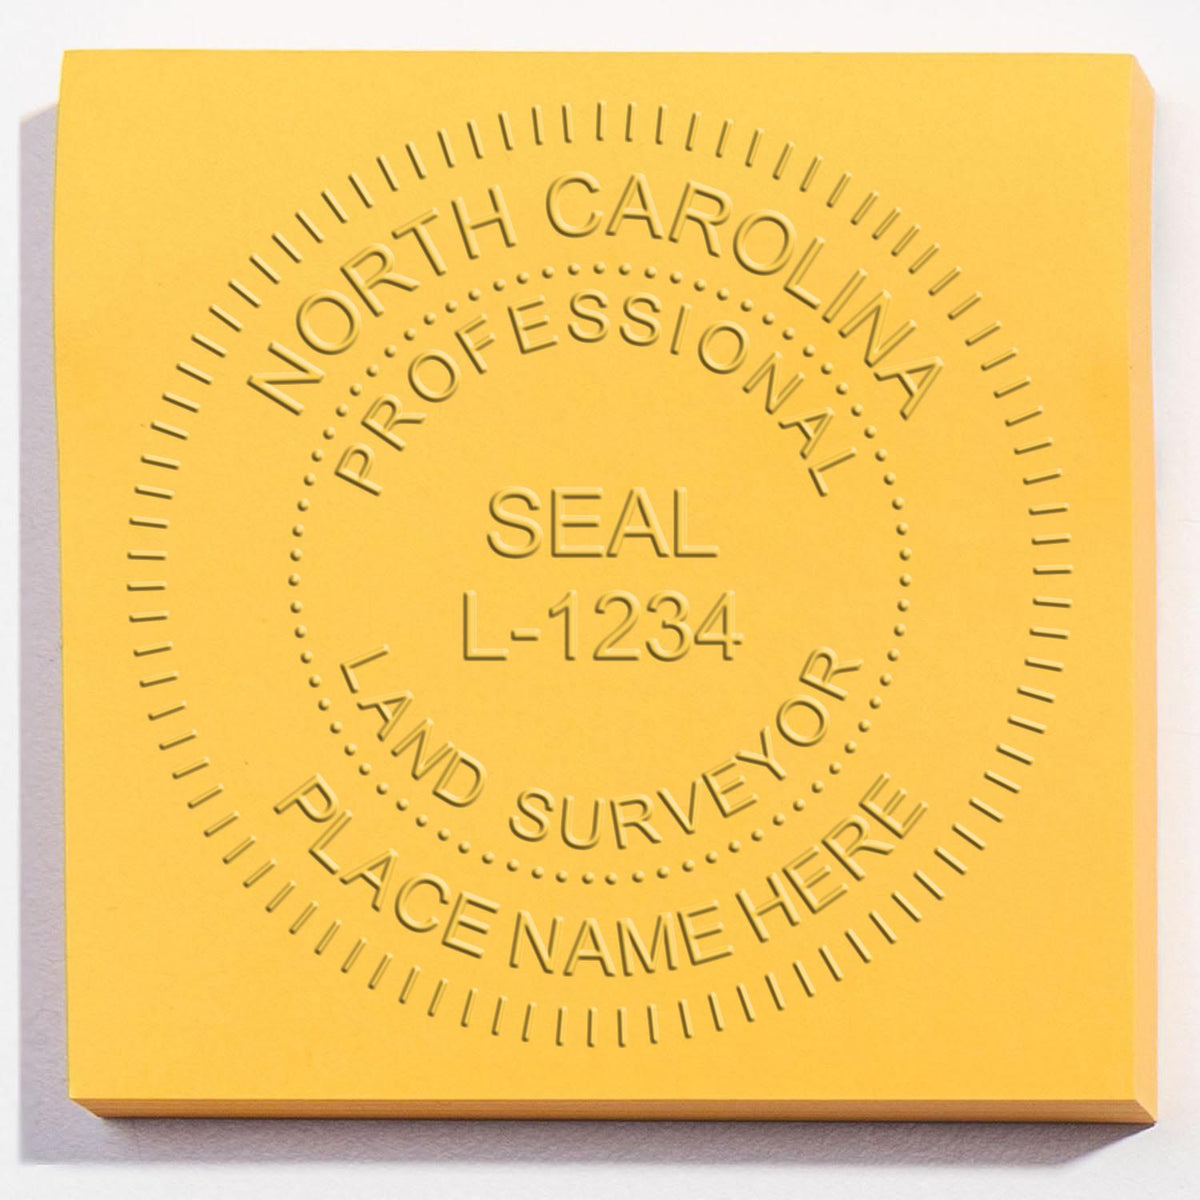 A stamped imprint of the Gift North Carolina Land Surveyor Seal in this stylish lifestyle photo, setting the tone for a unique and personalized product.